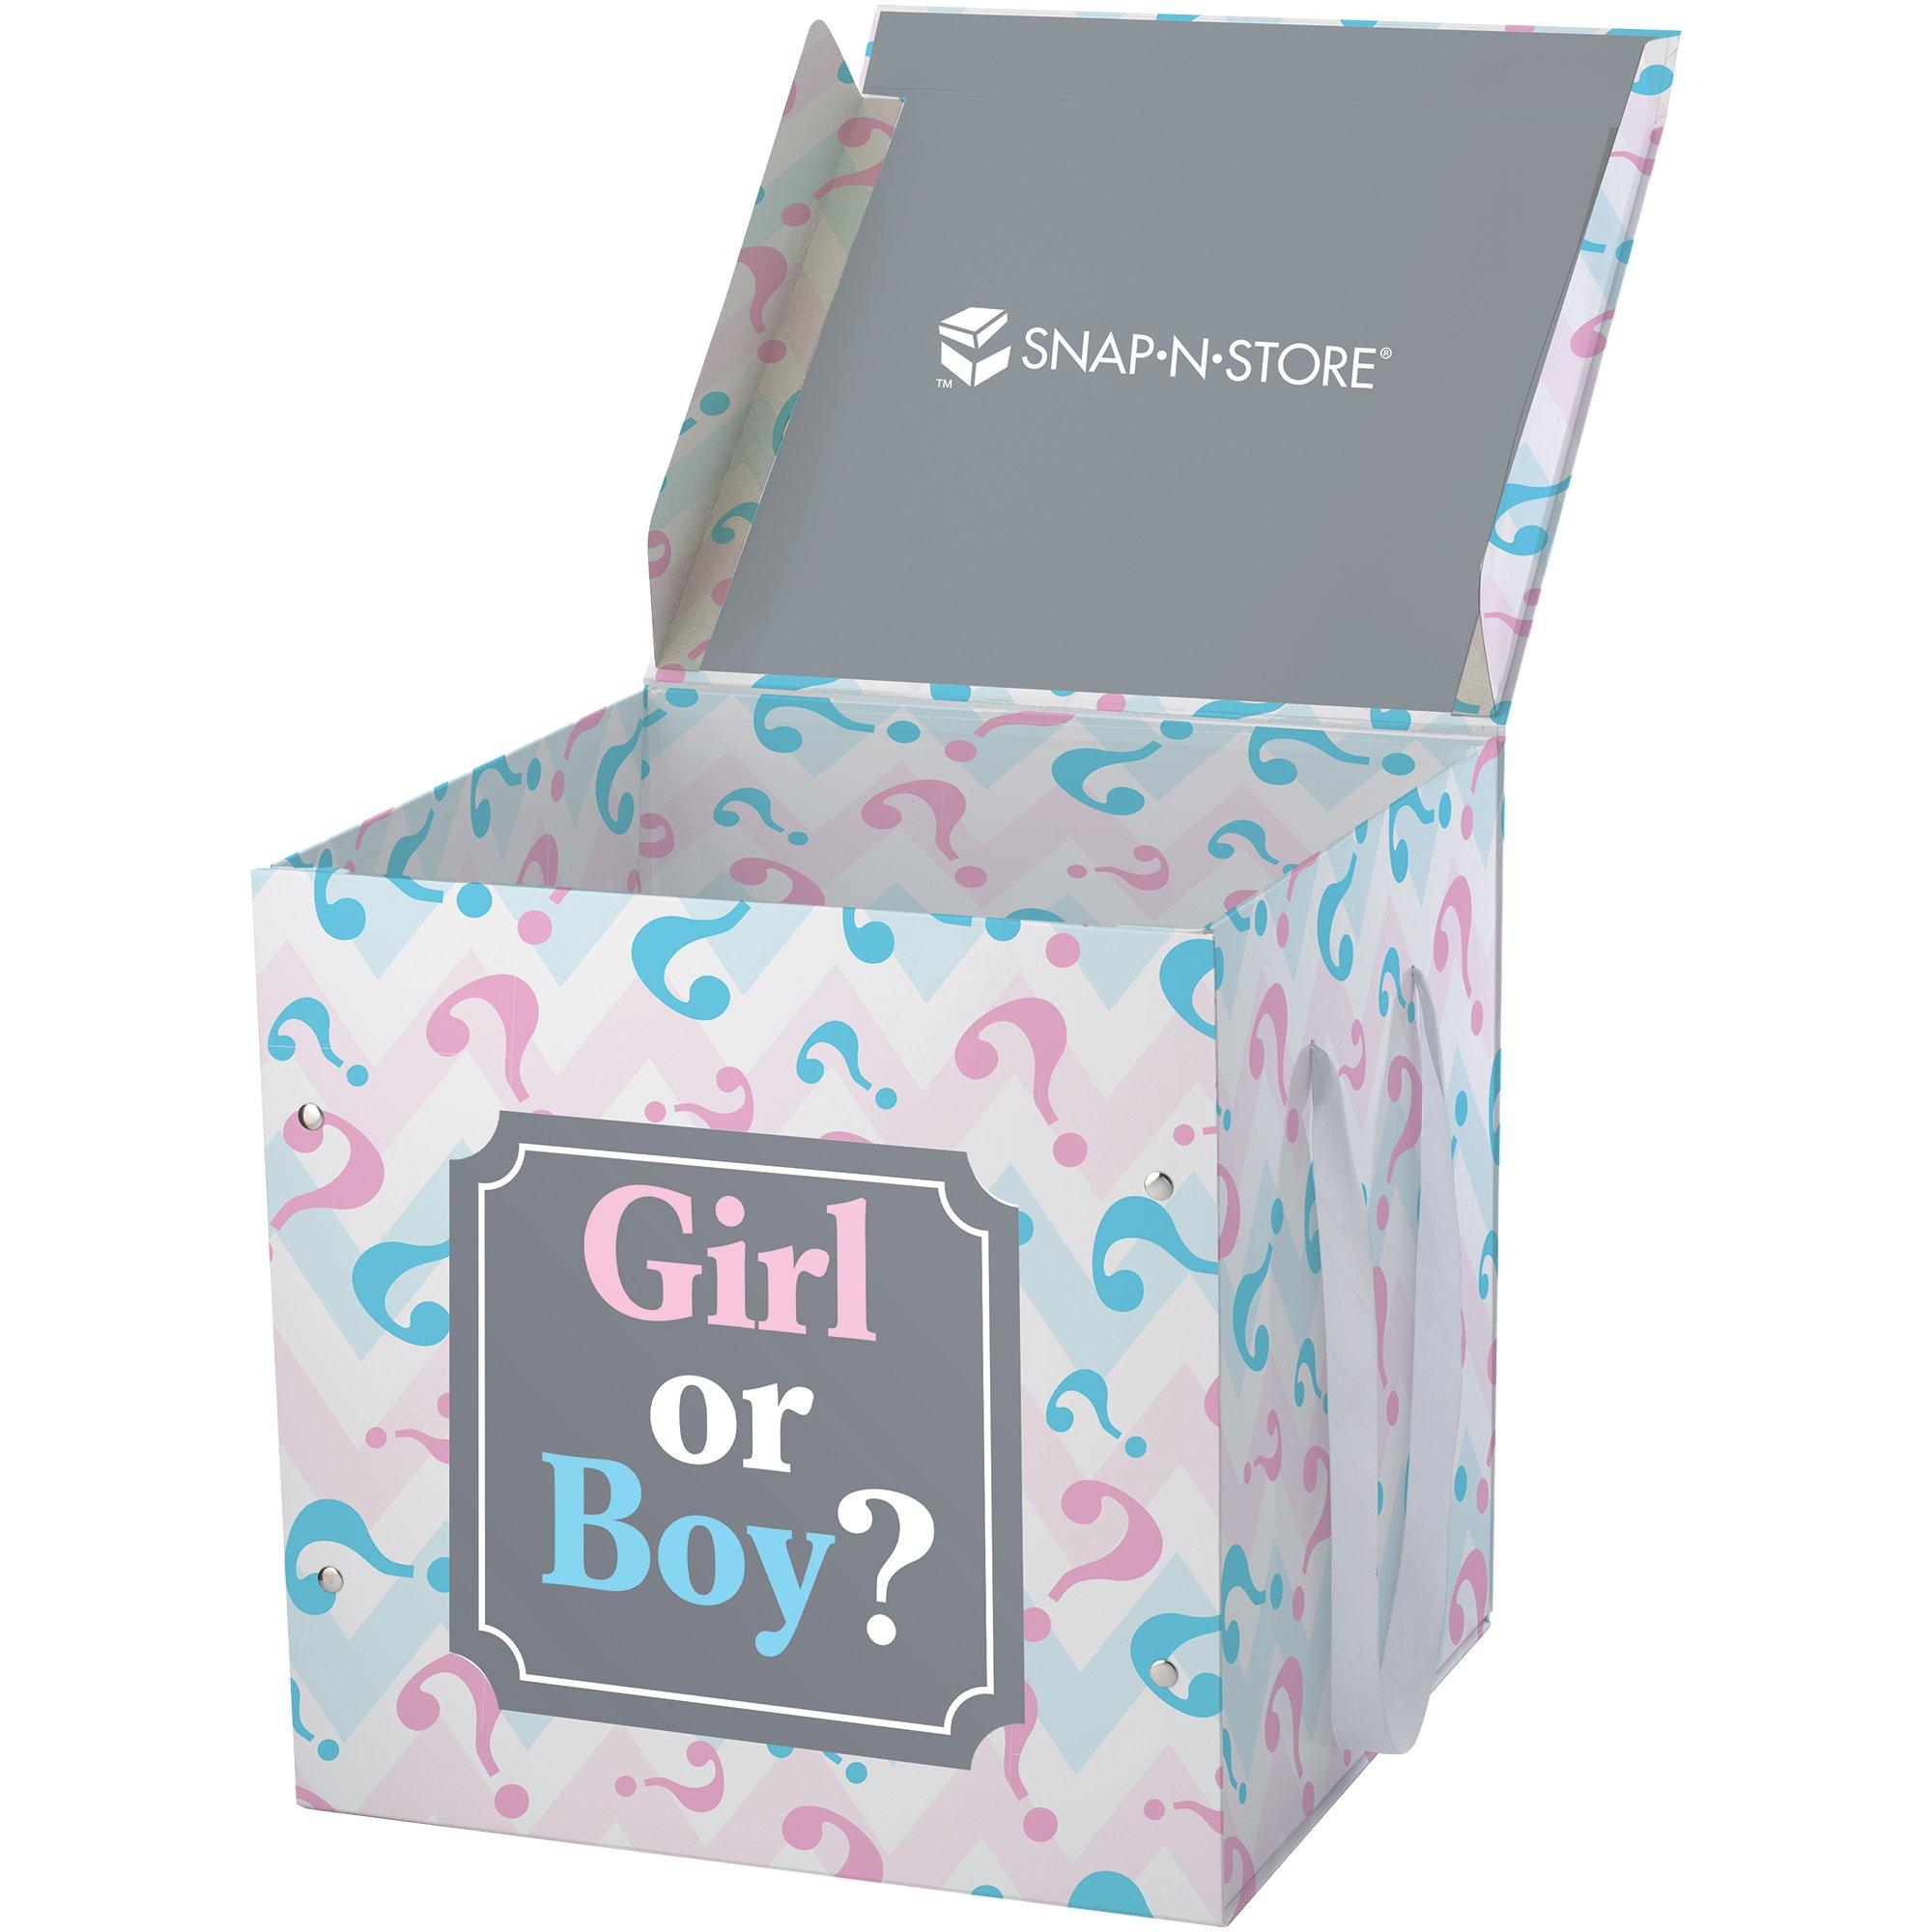 PINK HAT BOX, Blue Hat Box, Welcome Baby Gift Box, Girl Baby